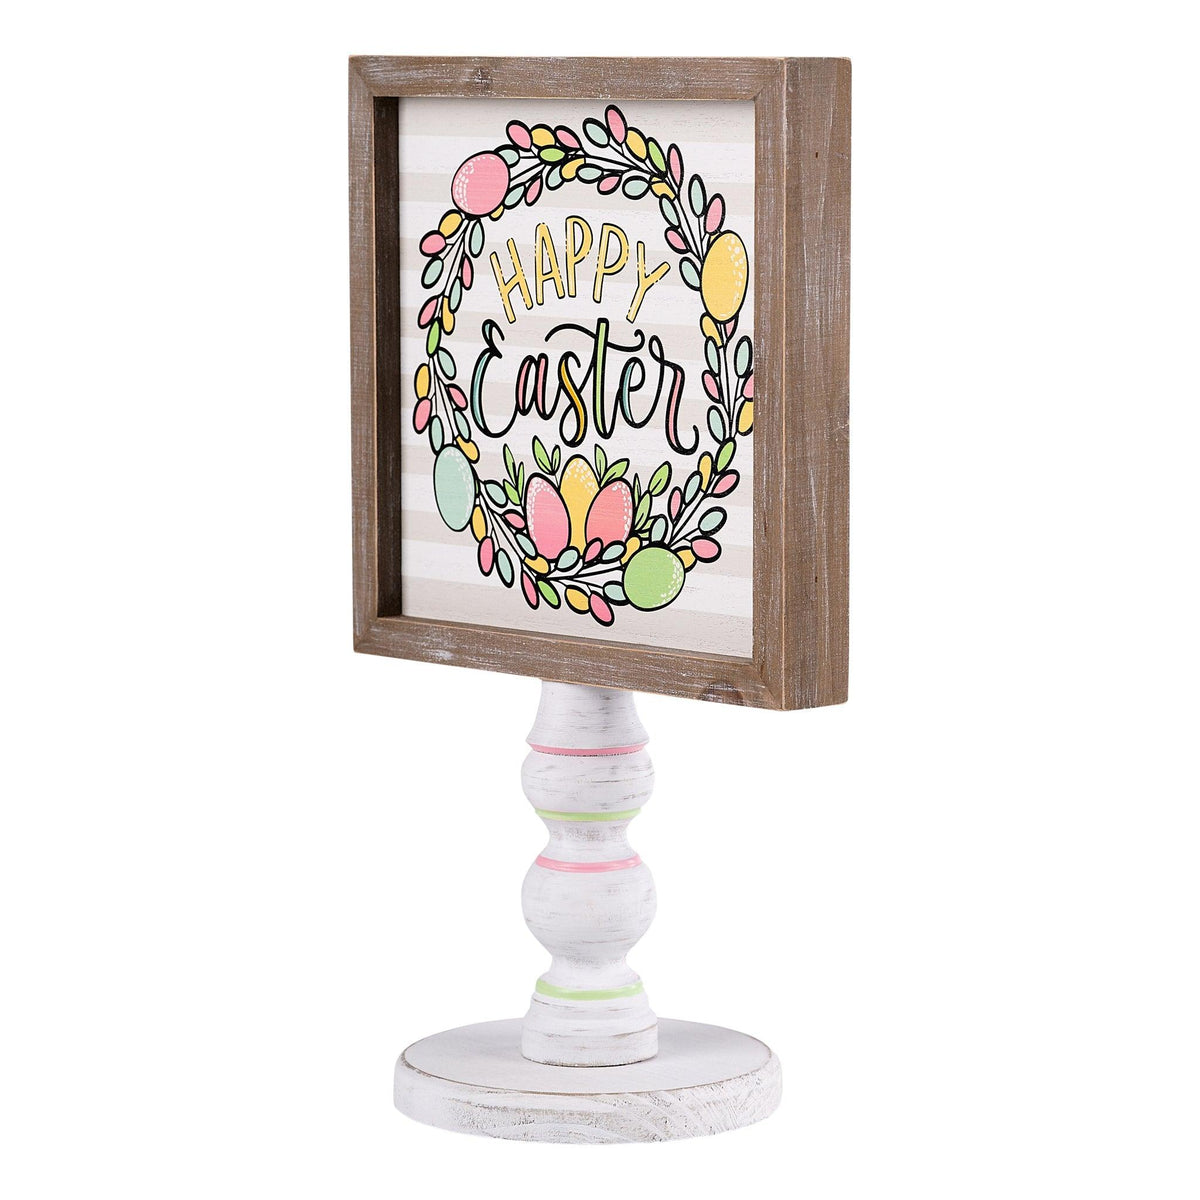 Greet All With A Happy Easter Egg Wreath Stand This Spring – GLORY HAUS